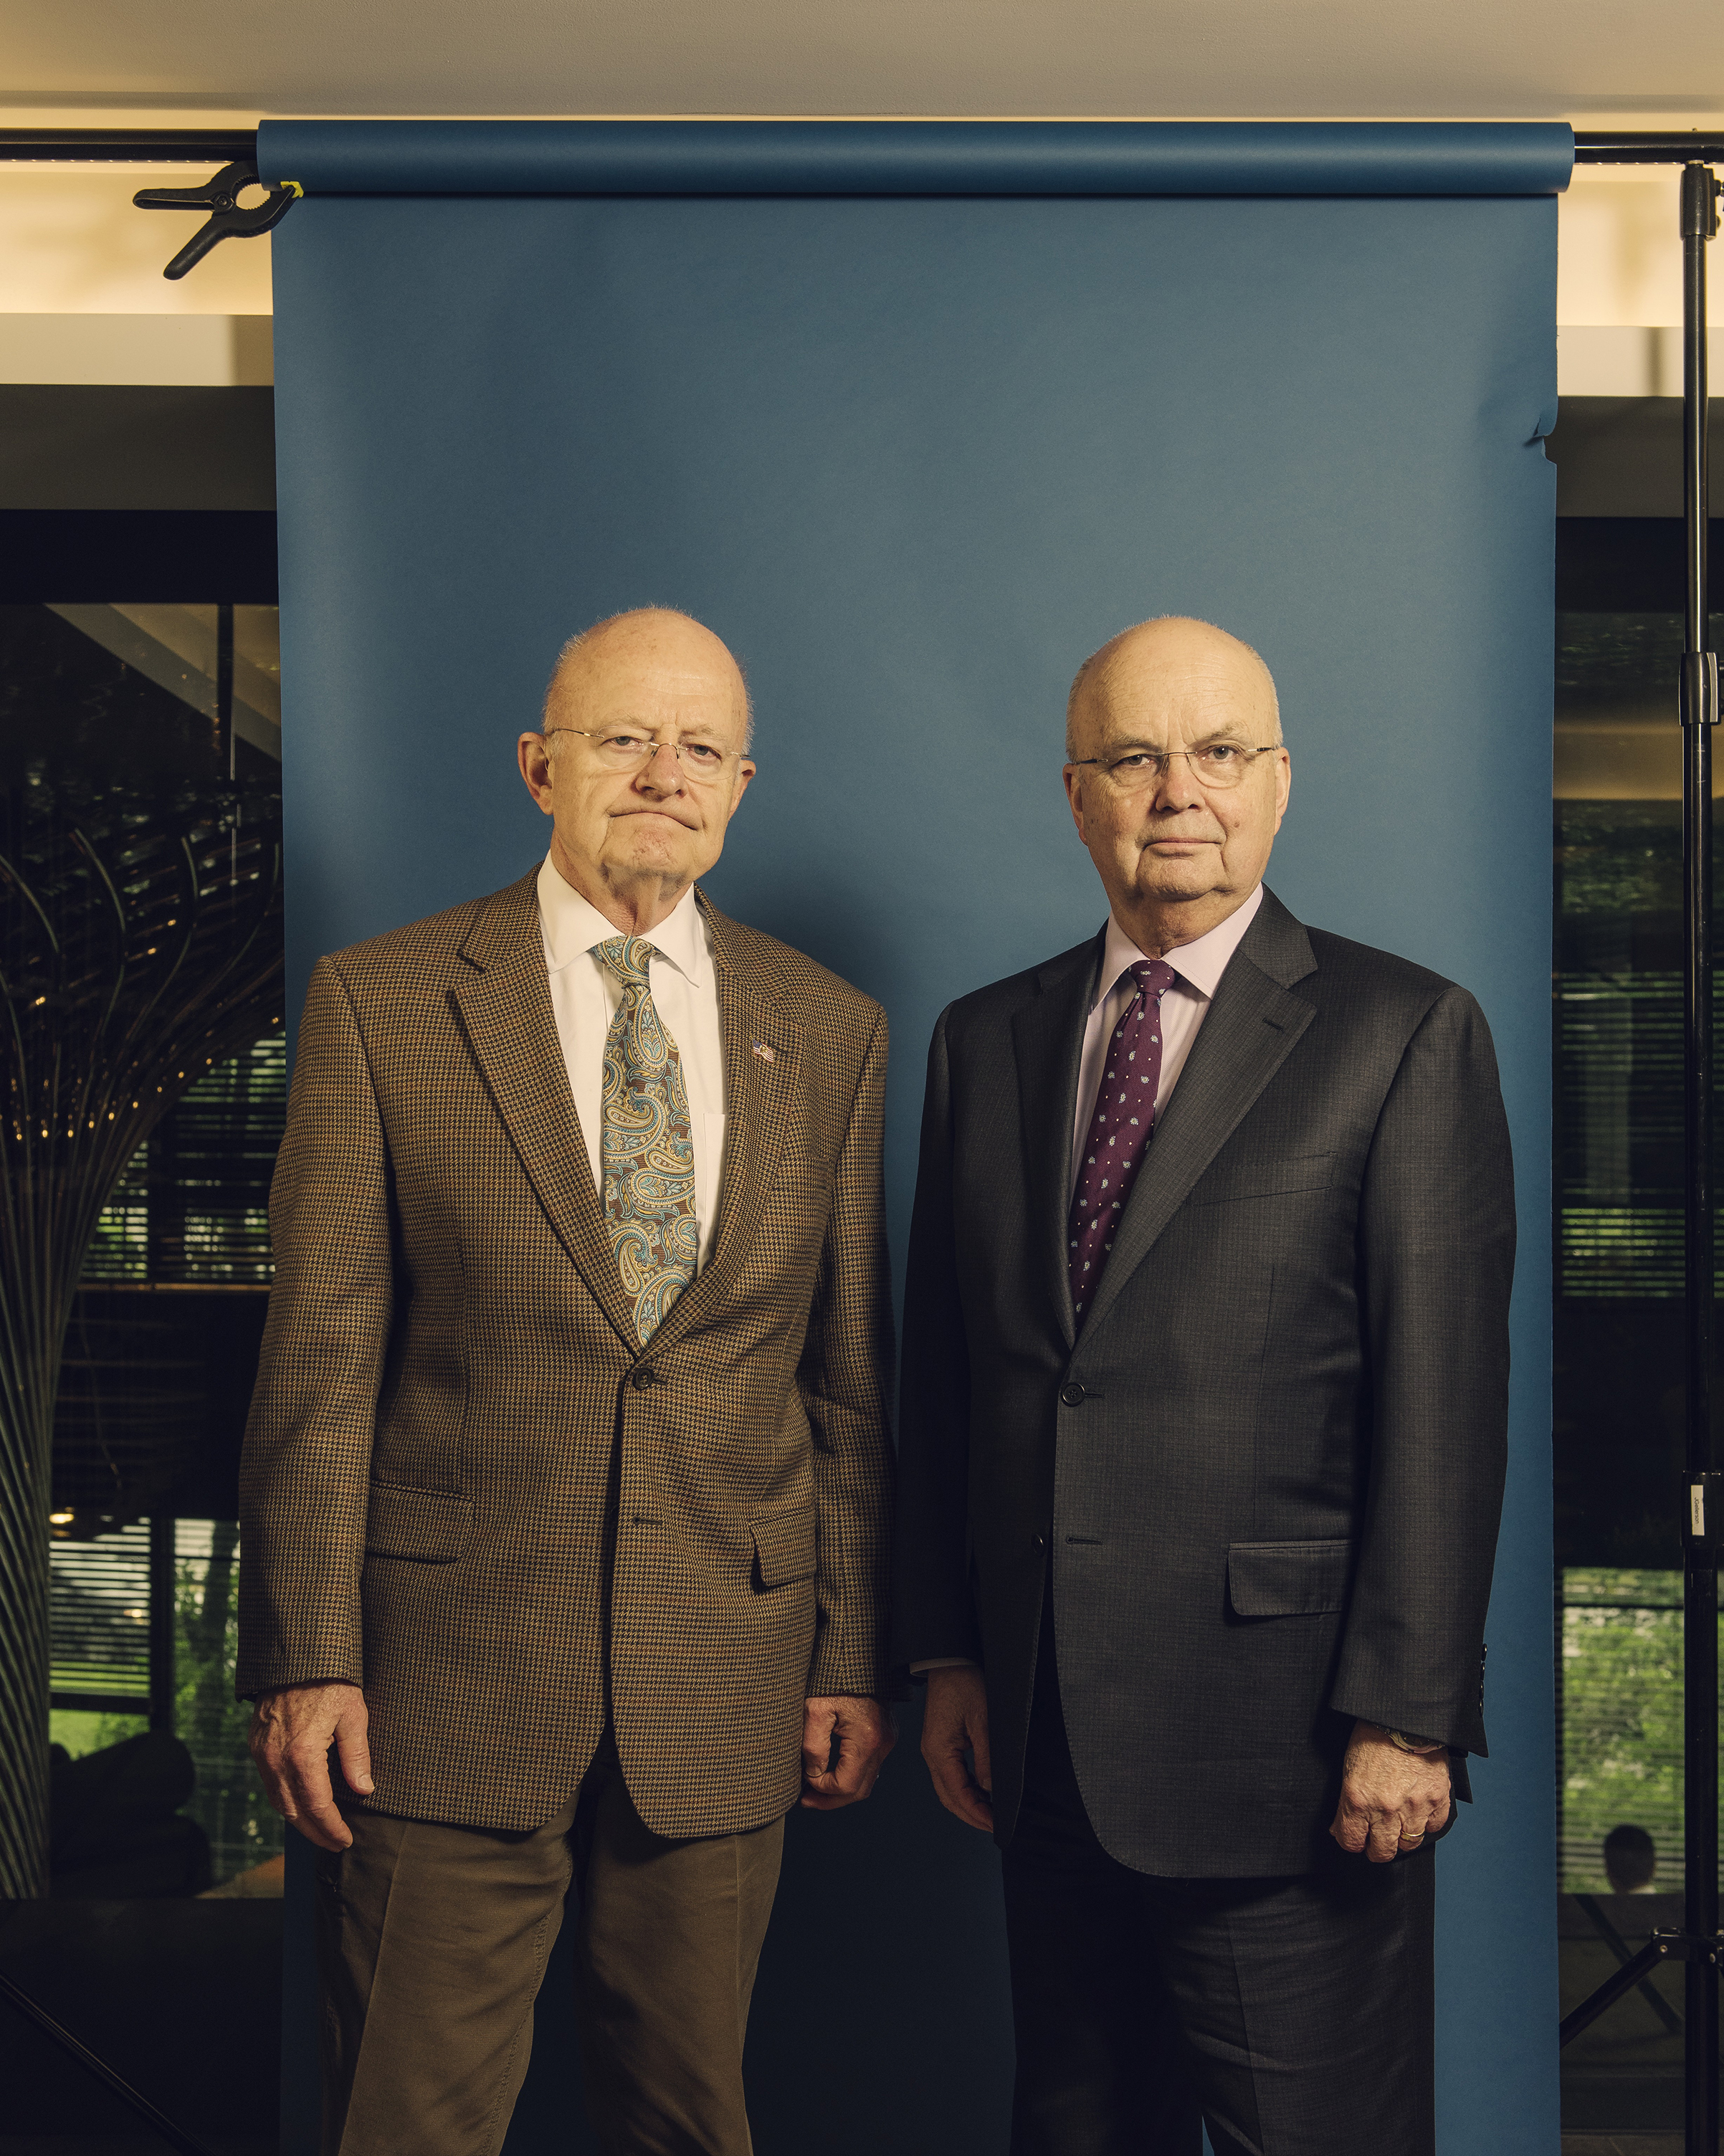 Former Director of National Intelligence James Clapper, left, and former CIA chief Michael Hayden at the Watergate Hotel in May (Jared Soares for TIME)